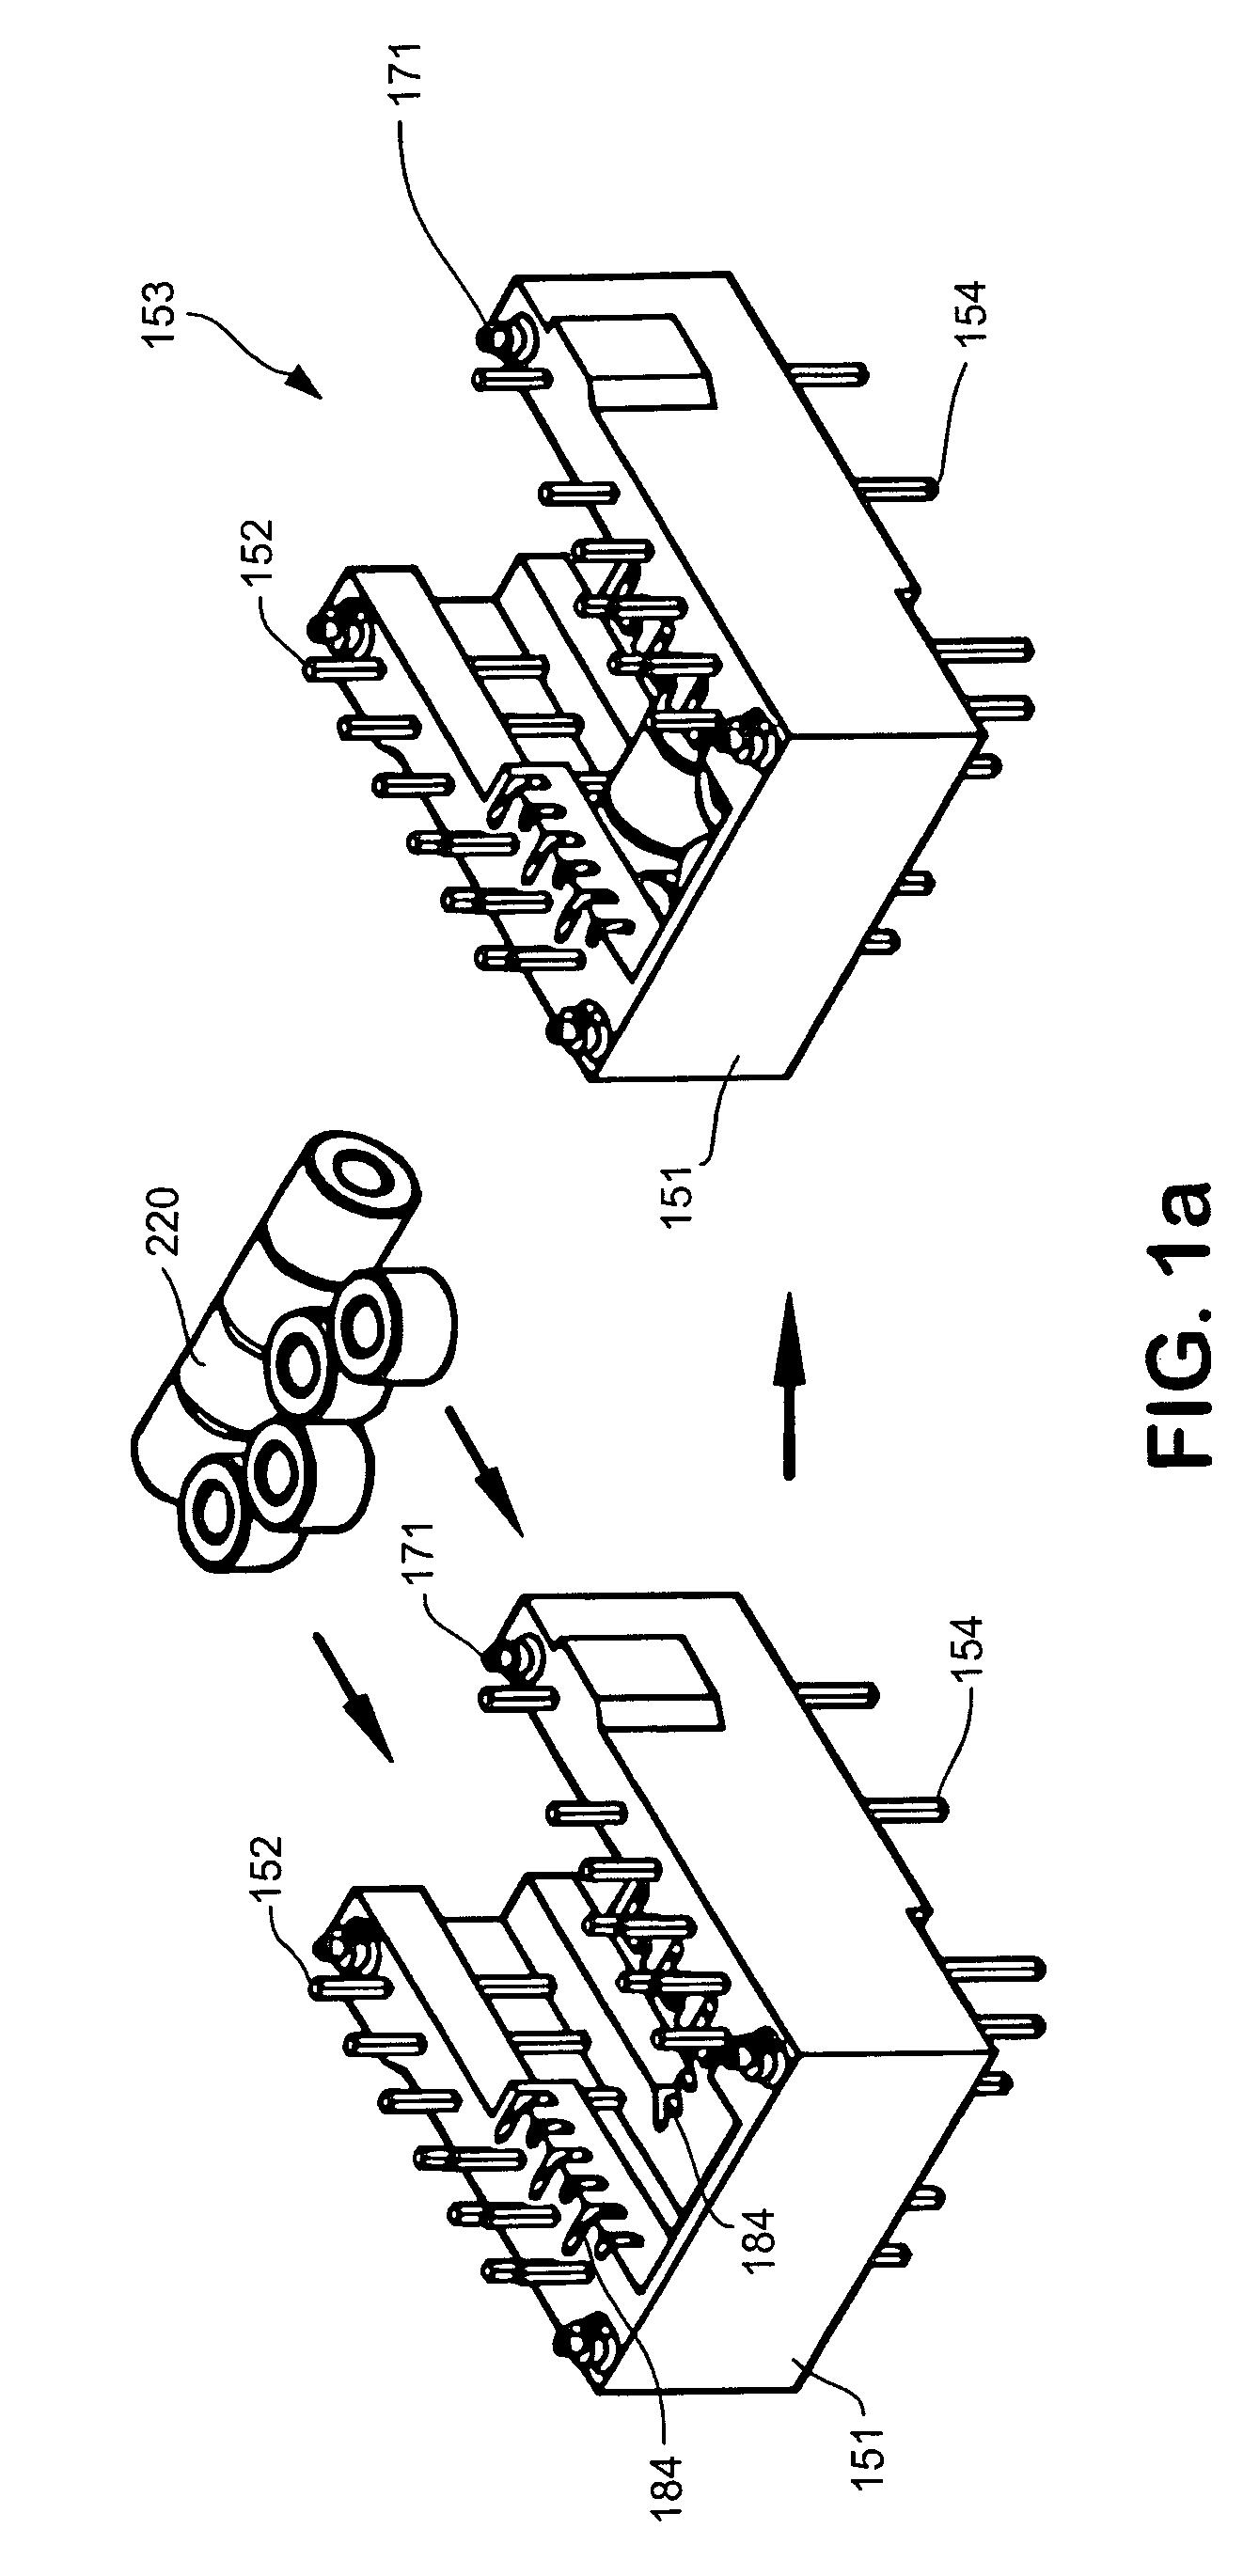 Power-enabled connector assembly with heat dissipation apparatus and method of manufacturing